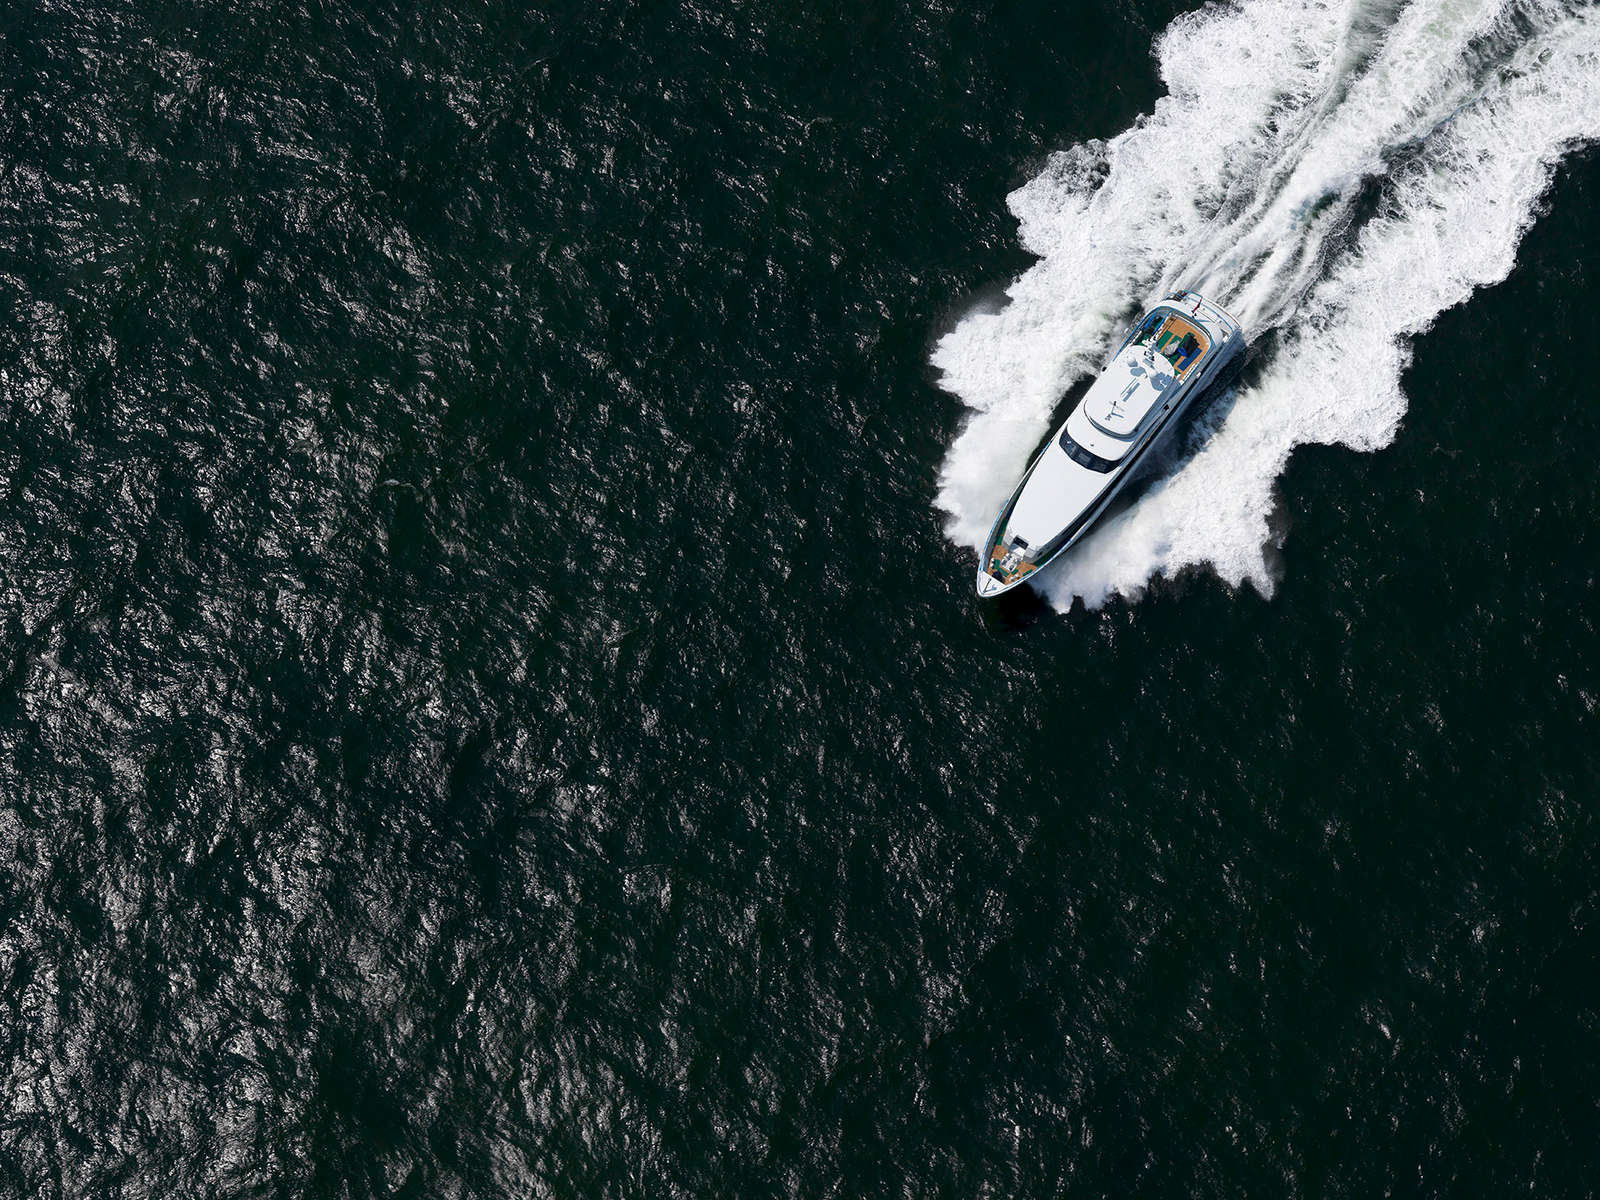 Heesen yachtsSeatrials at the North Sea, June 2012.Image taken with Hasselblad H3DII-50